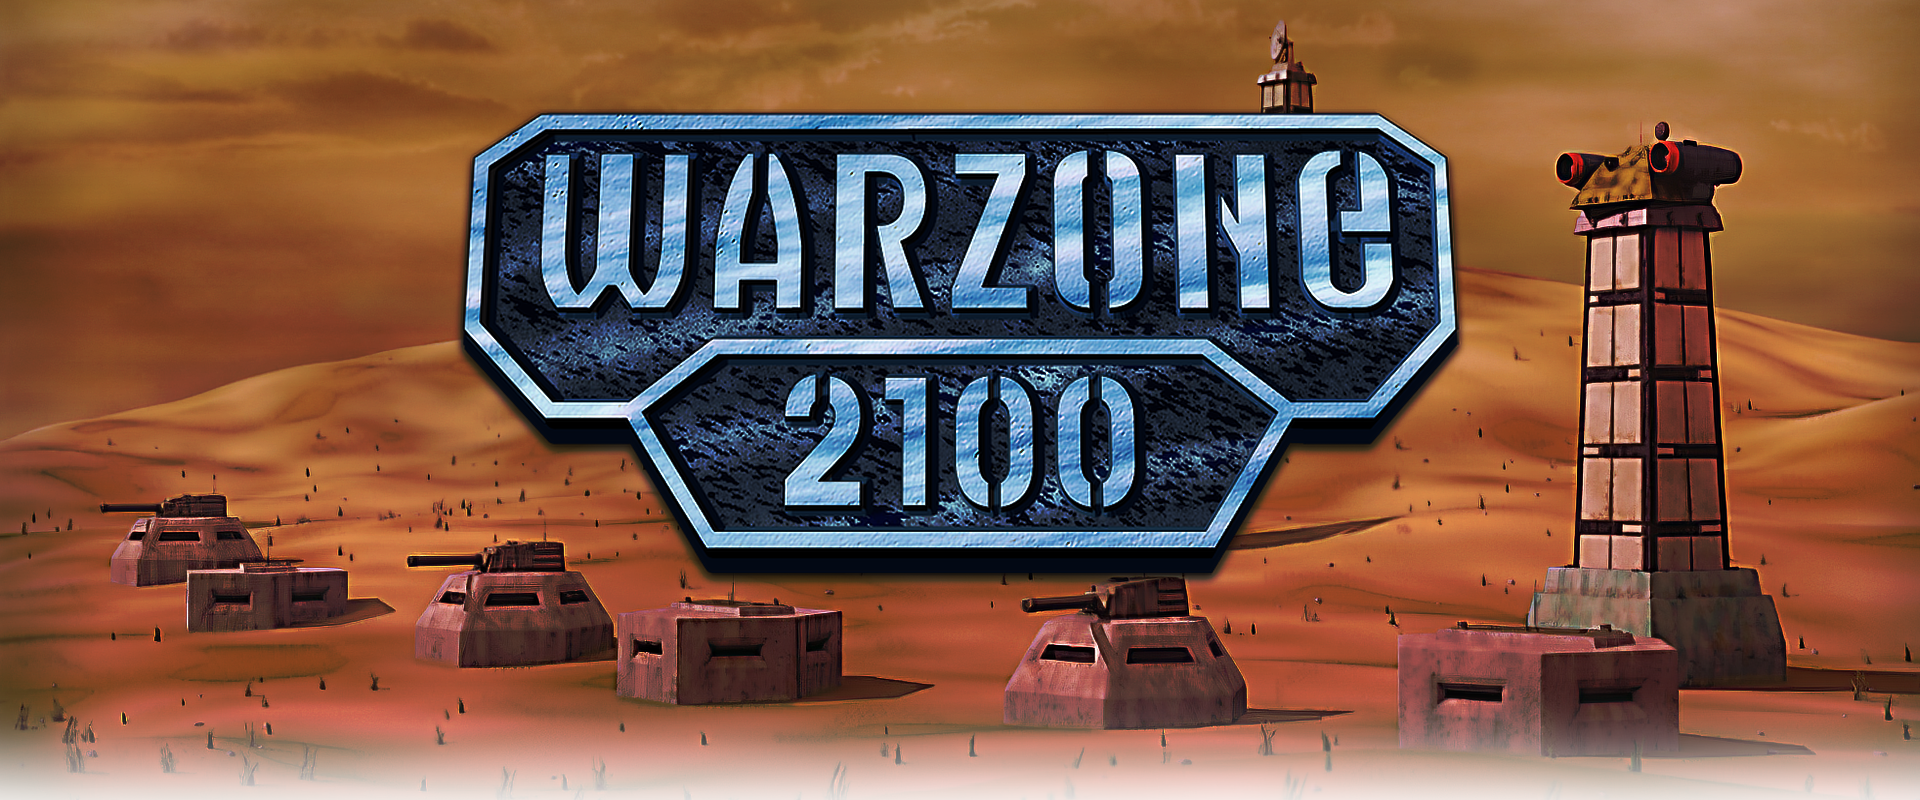 Warzone 2100 by Warzone 2100 Project